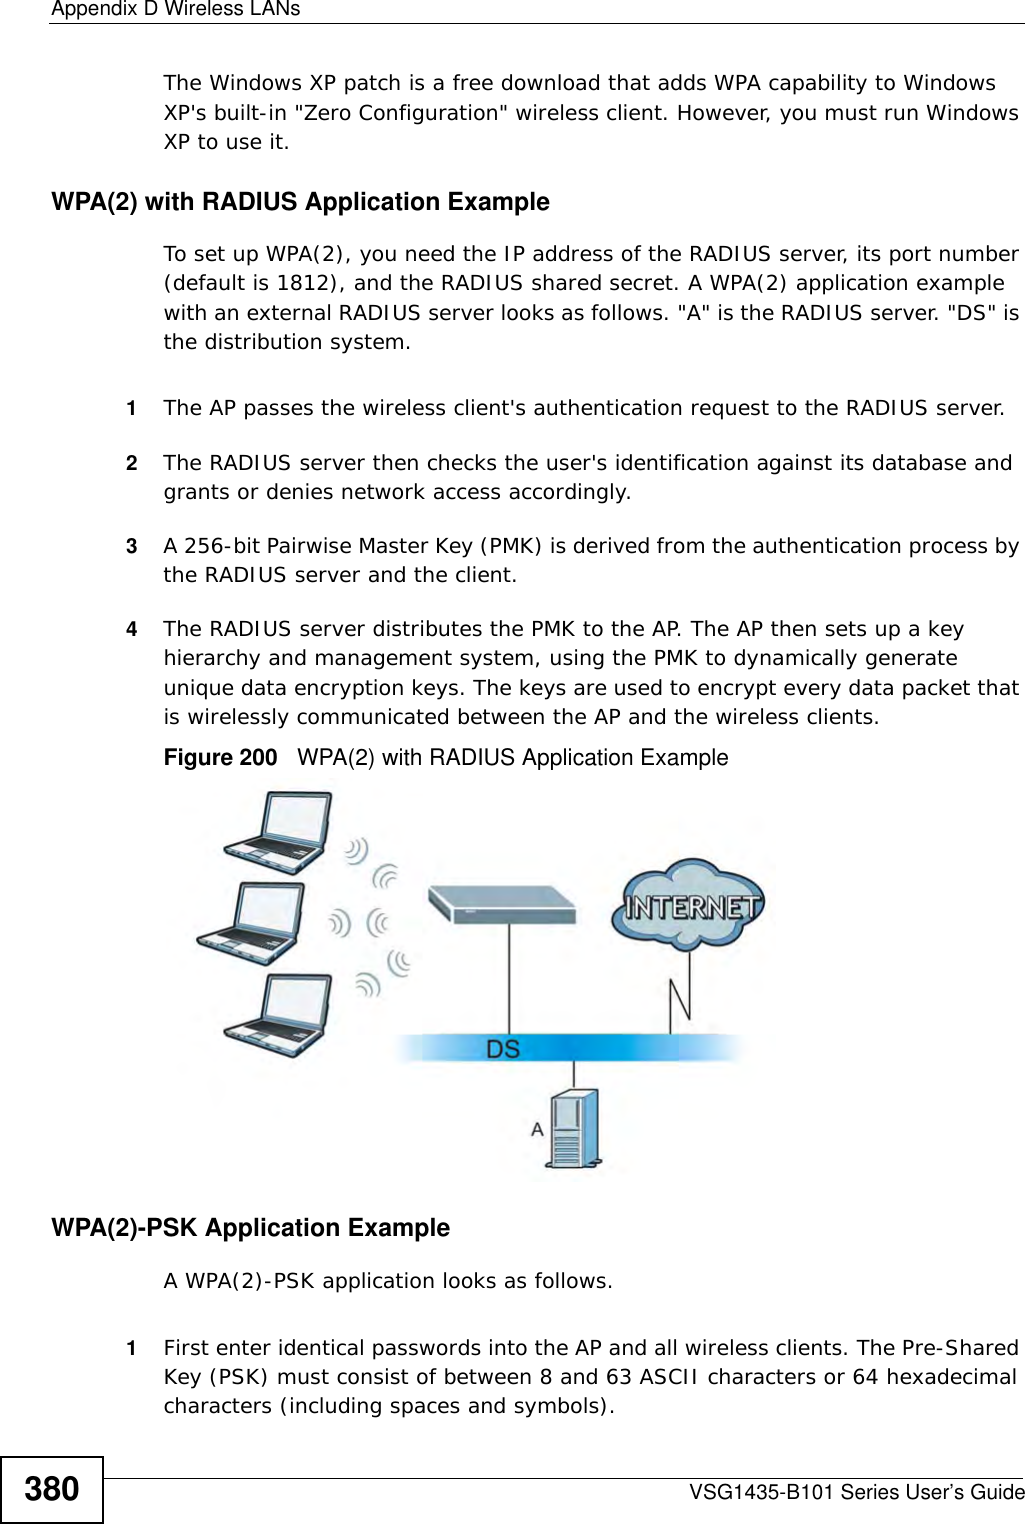 Appendix D Wireless LANsVSG1435-B101 Series User’s Guide380The Windows XP patch is a free download that adds WPA capability to Windows XP&apos;s built-in &quot;Zero Configuration&quot; wireless client. However, you must run Windows XP to use it. WPA(2) with RADIUS Application ExampleTo set up WPA(2), you need the IP address of the RADIUS server, its port number (default is 1812), and the RADIUS shared secret. A WPA(2) application example with an external RADIUS server looks as follows. &quot;A&quot; is the RADIUS server. &quot;DS&quot; is the distribution system.1The AP passes the wireless client&apos;s authentication request to the RADIUS server.2The RADIUS server then checks the user&apos;s identification against its database and grants or denies network access accordingly.3A 256-bit Pairwise Master Key (PMK) is derived from the authentication process by the RADIUS server and the client.4The RADIUS server distributes the PMK to the AP. The AP then sets up a key hierarchy and management system, using the PMK to dynamically generate unique data encryption keys. The keys are used to encrypt every data packet that is wirelessly communicated between the AP and the wireless clients.Figure 200   WPA(2) with RADIUS Application ExampleWPA(2)-PSK Application ExampleA WPA(2)-PSK application looks as follows.1First enter identical passwords into the AP and all wireless clients. The Pre-Shared Key (PSK) must consist of between 8 and 63 ASCII characters or 64 hexadecimal characters (including spaces and symbols).